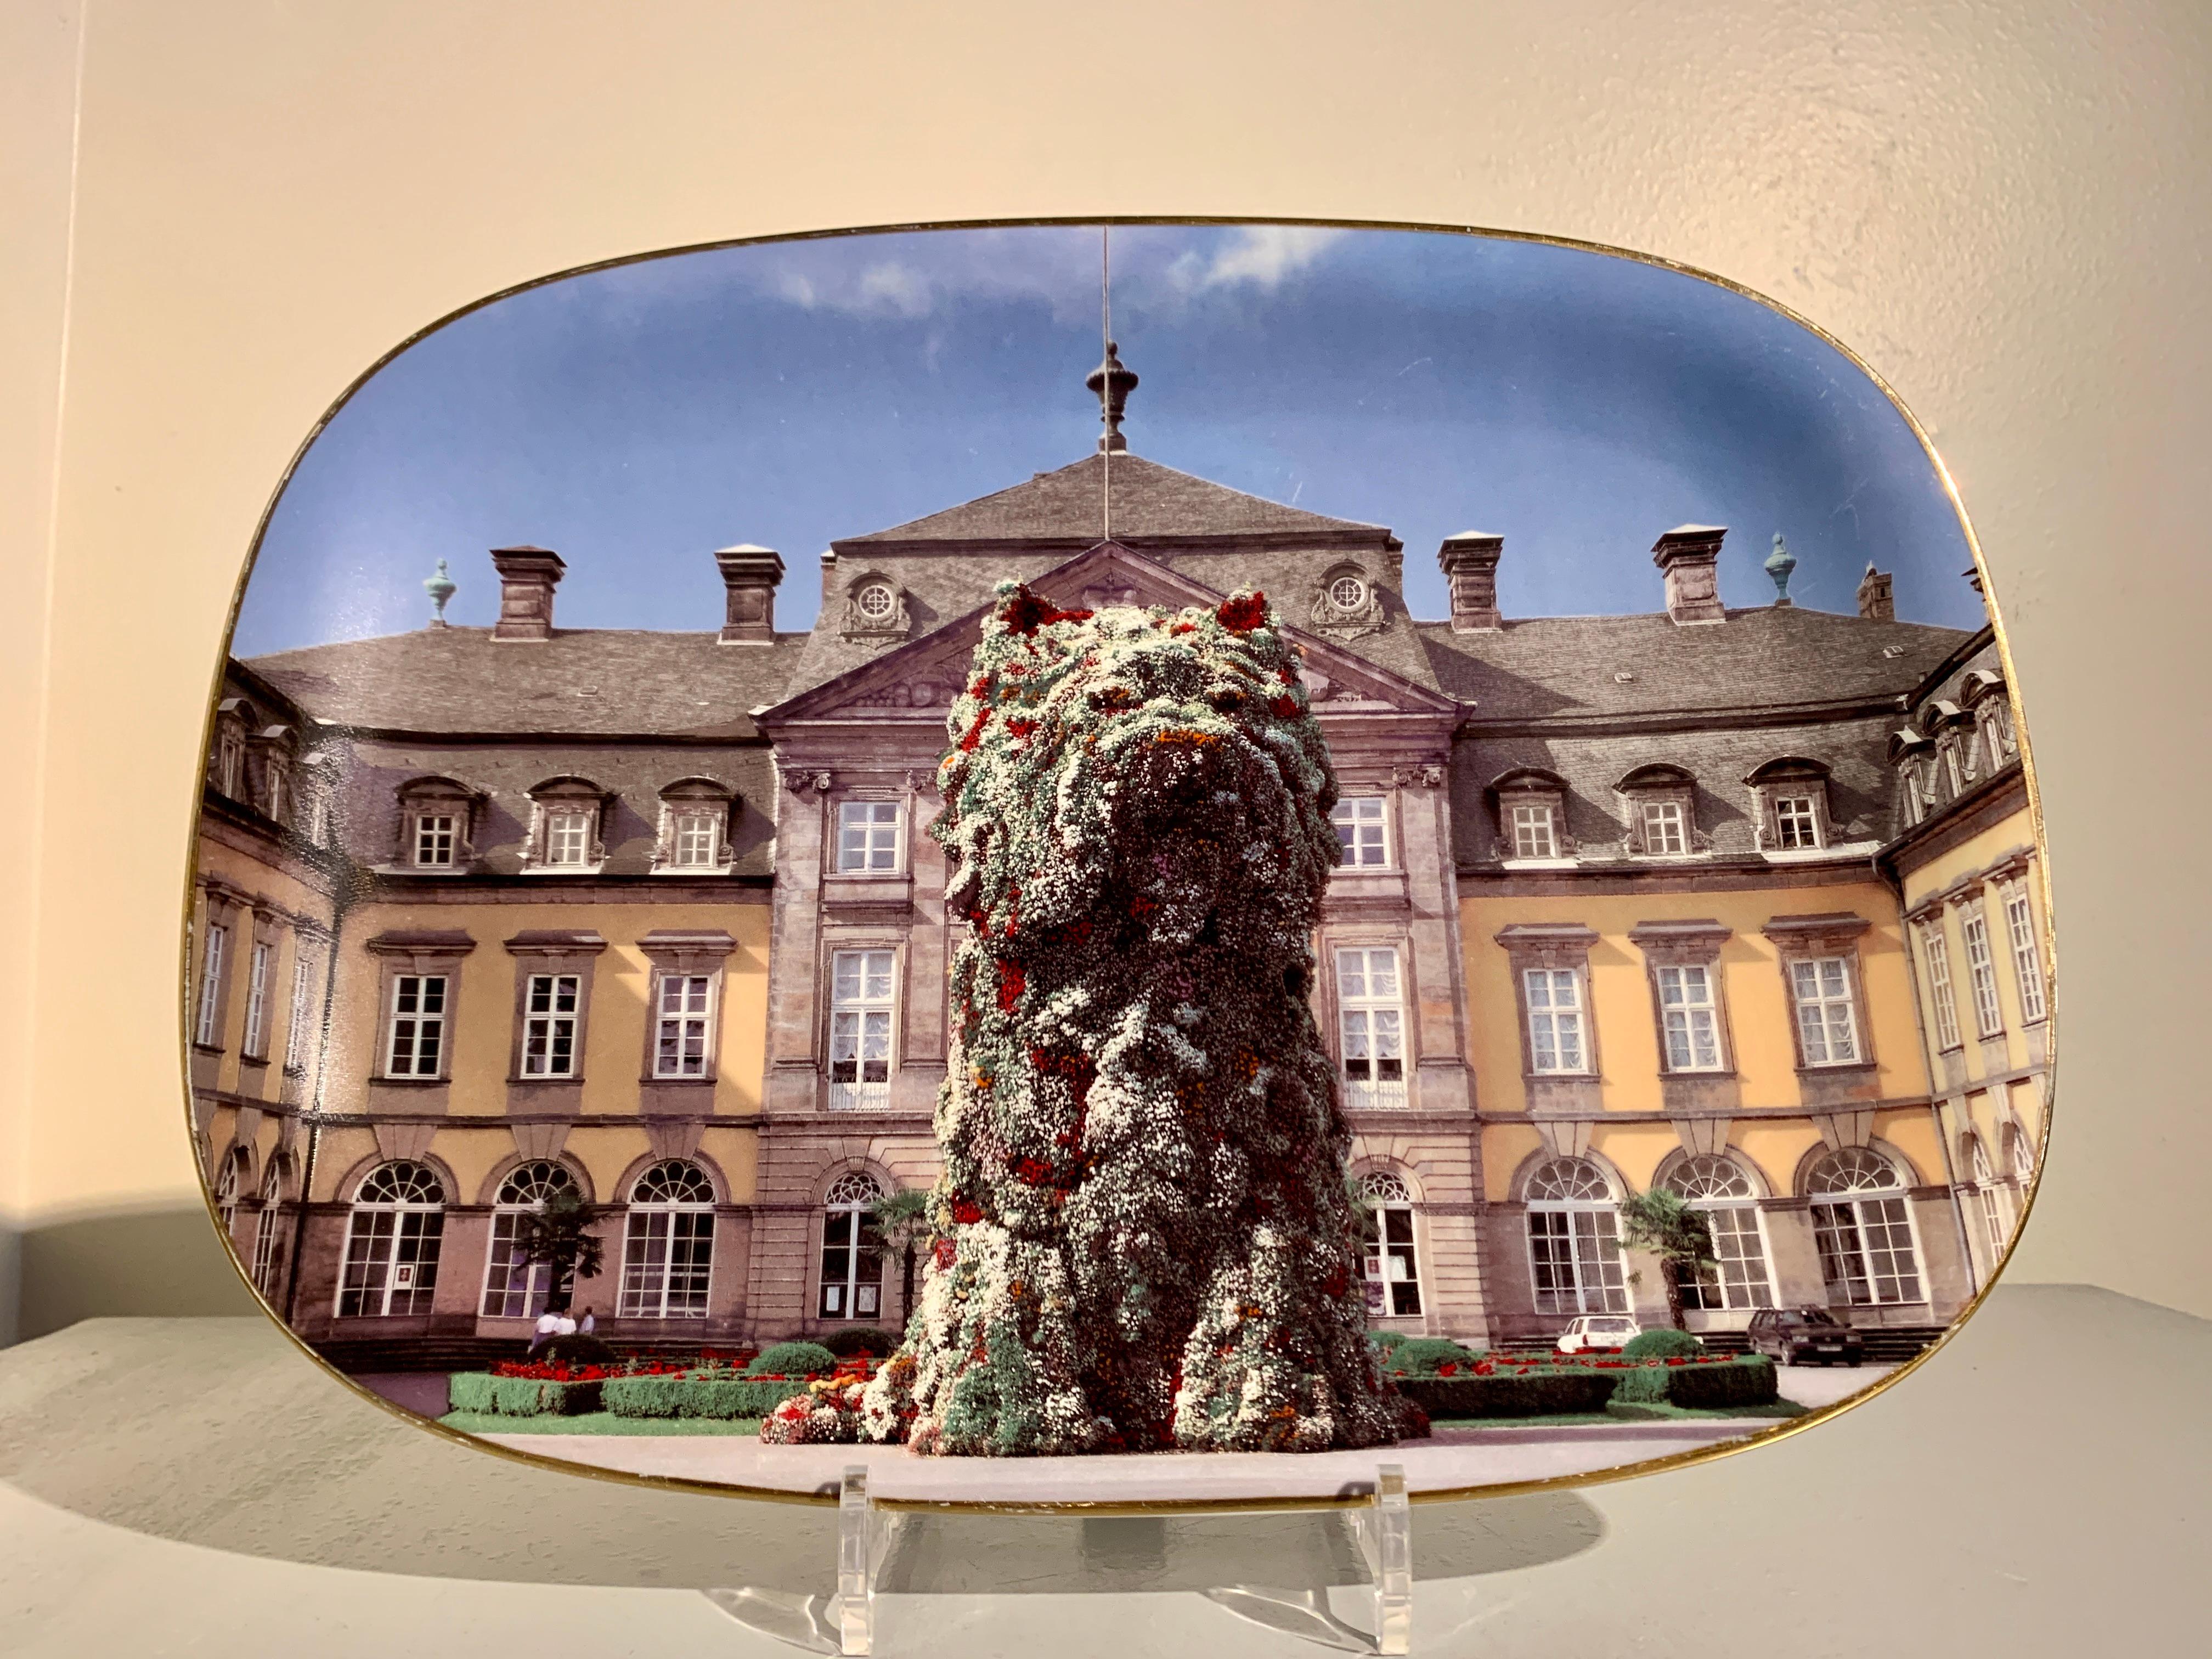 A darling and charming Jeff Koons limited edition Puppy plate or platter, by Porzellanfabrik Langenthal AG for the San Francisco Museum of Modern Art, 1992. Signed and numbered.

The image on this plate is taken from Jeff Koon's now iconic massive